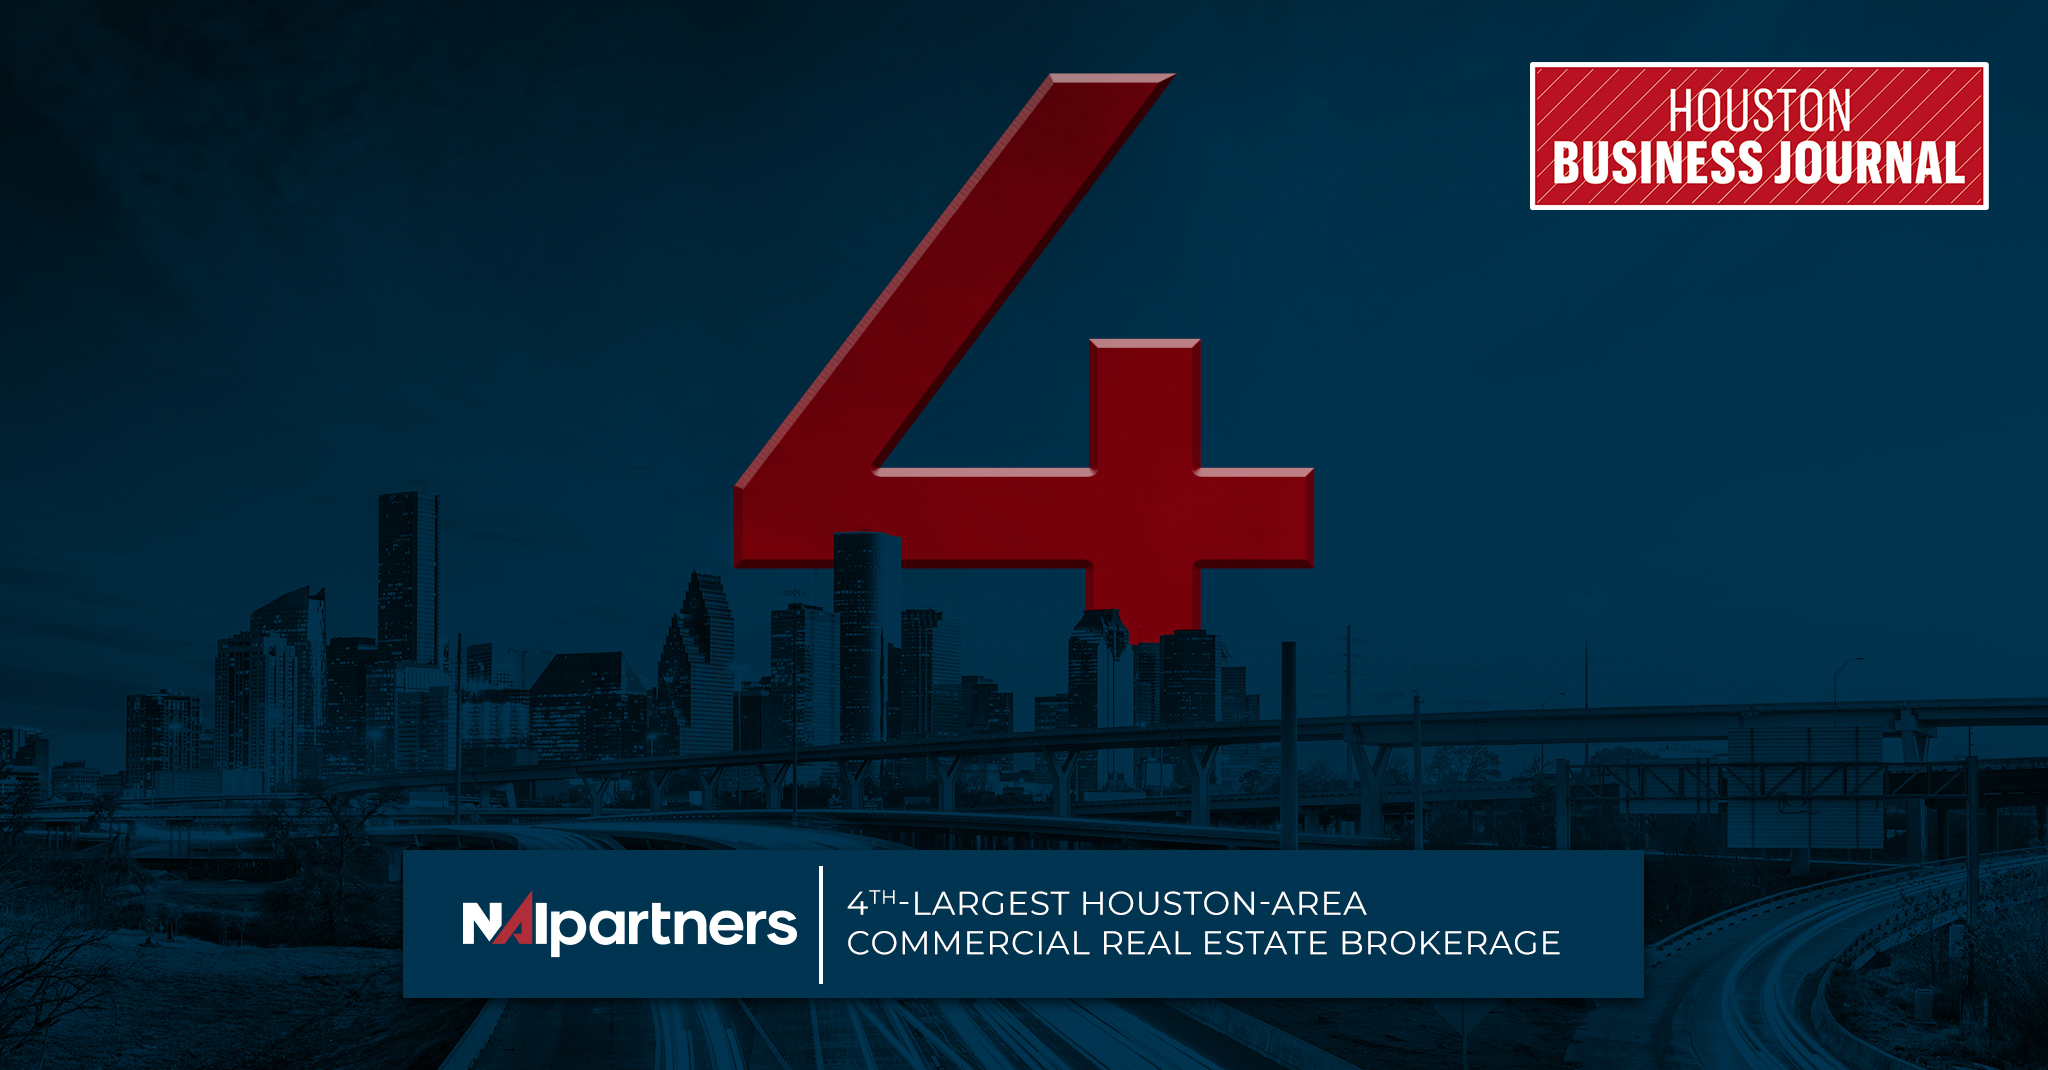 NAI Partners remains 4th-Largest Houston-Area Commercial Real Estate Brokerage